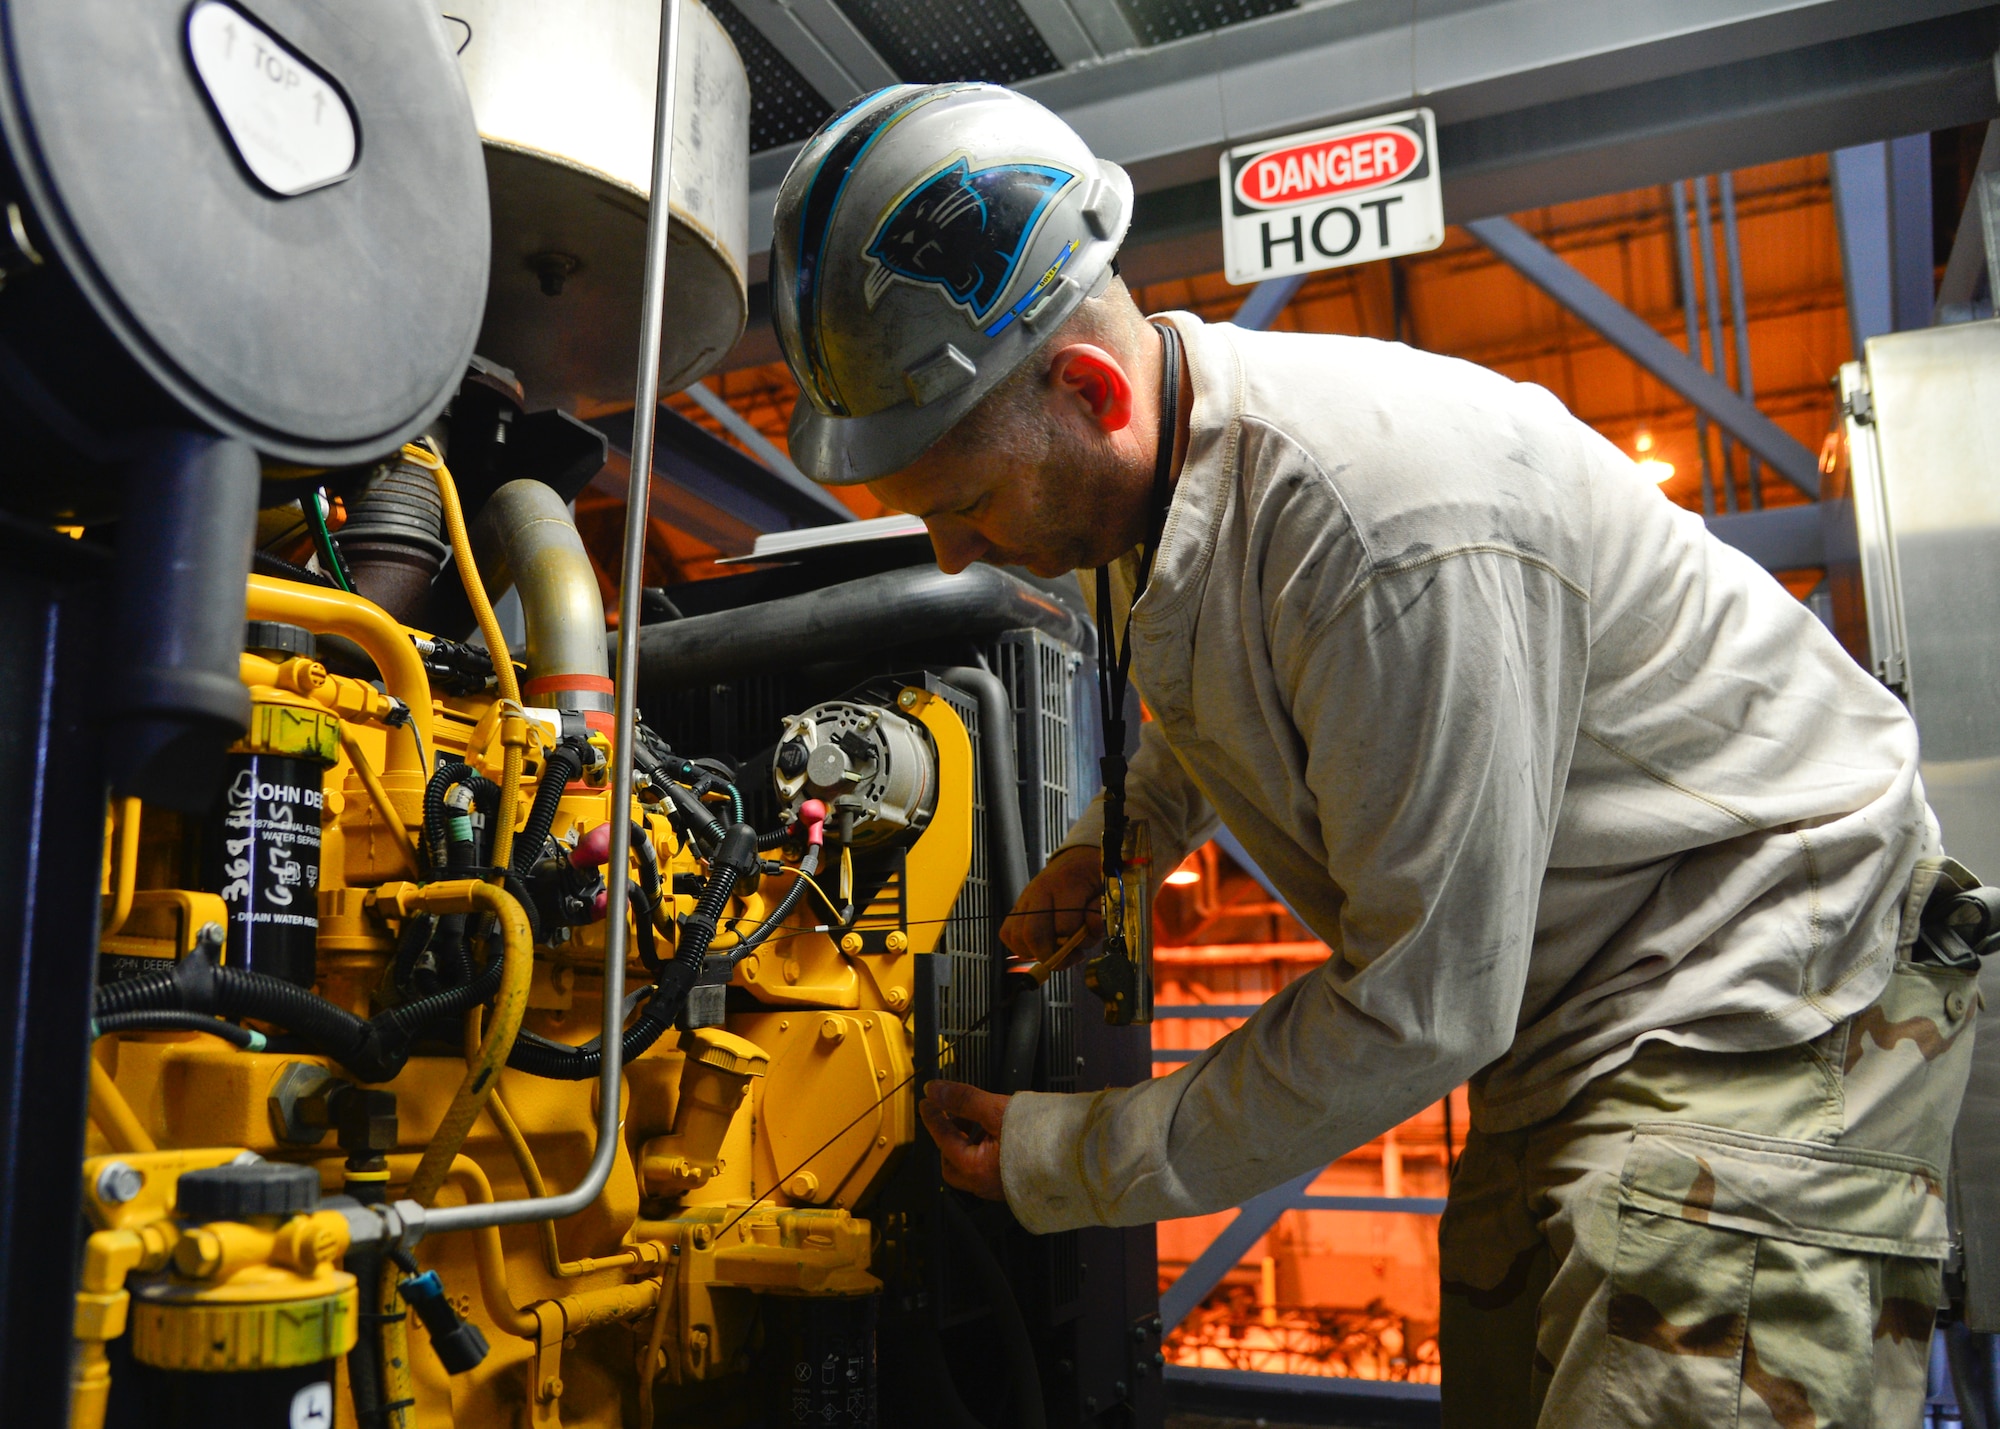 Jason Smith, 512th Maintenance Squadron floor chief, checks the oil on a diesel motor that provides power to the maintenance stands in the isochronal dock Dec. 2, 2015, at Dover Air Force Base, Del. Smith has been performing isochronal inspections for more than 27 years and has worked on every C-5 flying in the Air Force today. (U.S. Air Force photo/Senior Airman William Johnson)